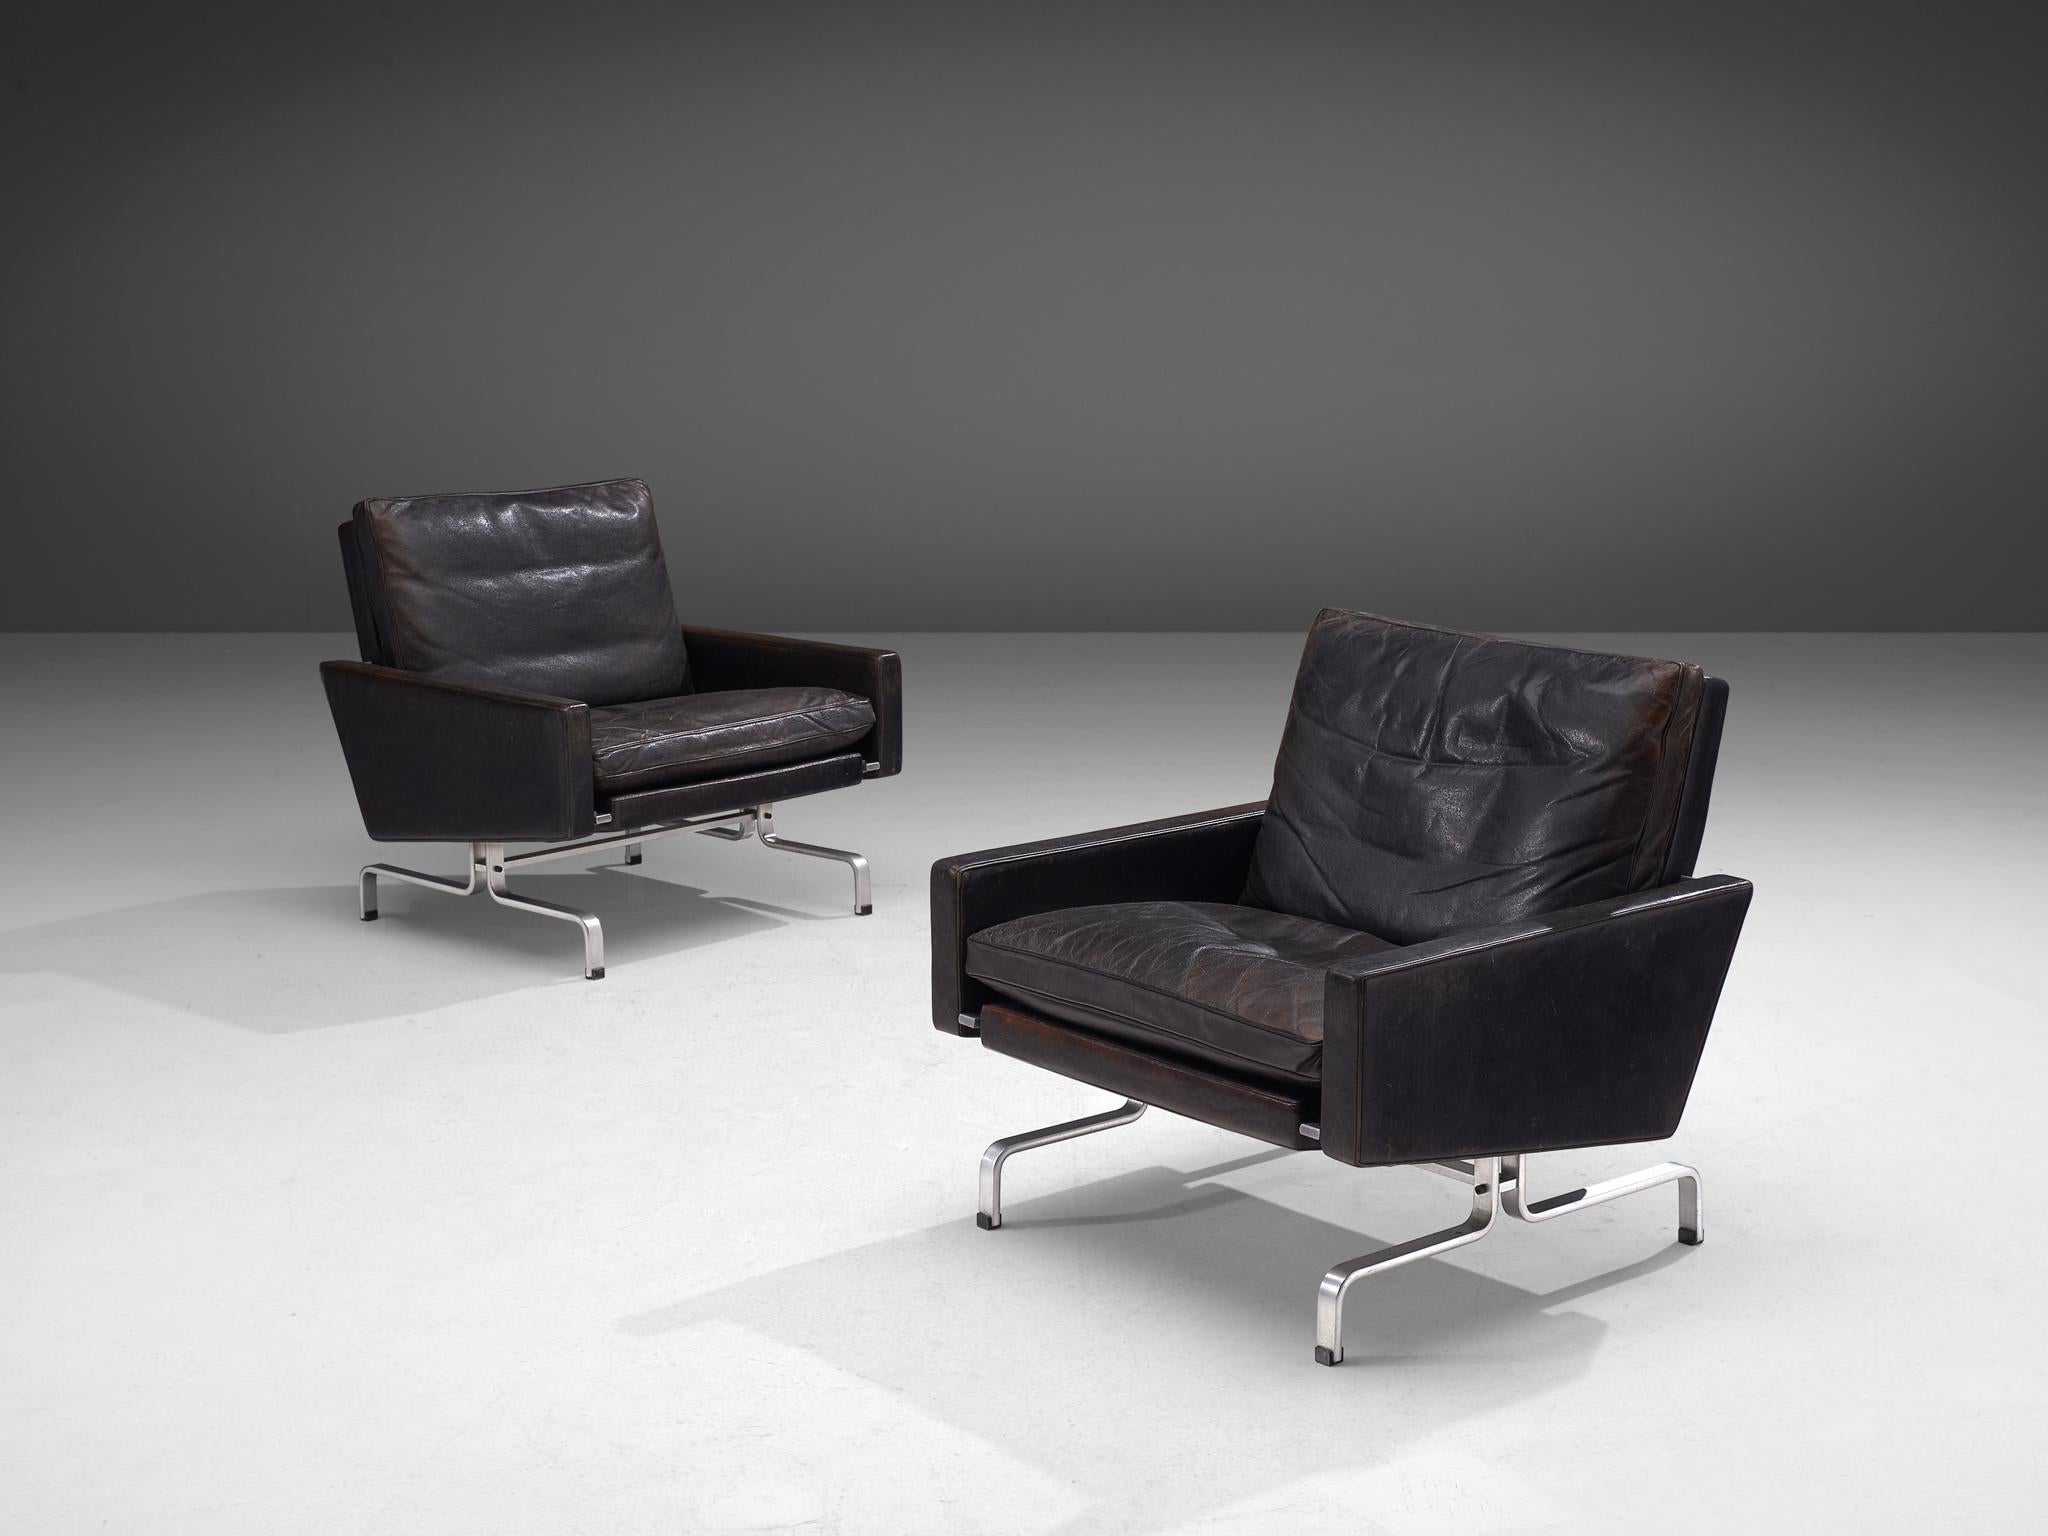 Poul Kjærholm for E. Kold Christensen, pair of 'PK 31-1' lounge chairs, leather, chrome-plated steel, Denmark, 1958.

The design features Poul Kjaerholm’s ability to work with exquisite materials and minimalism. The shapes are modest, yet elegant.